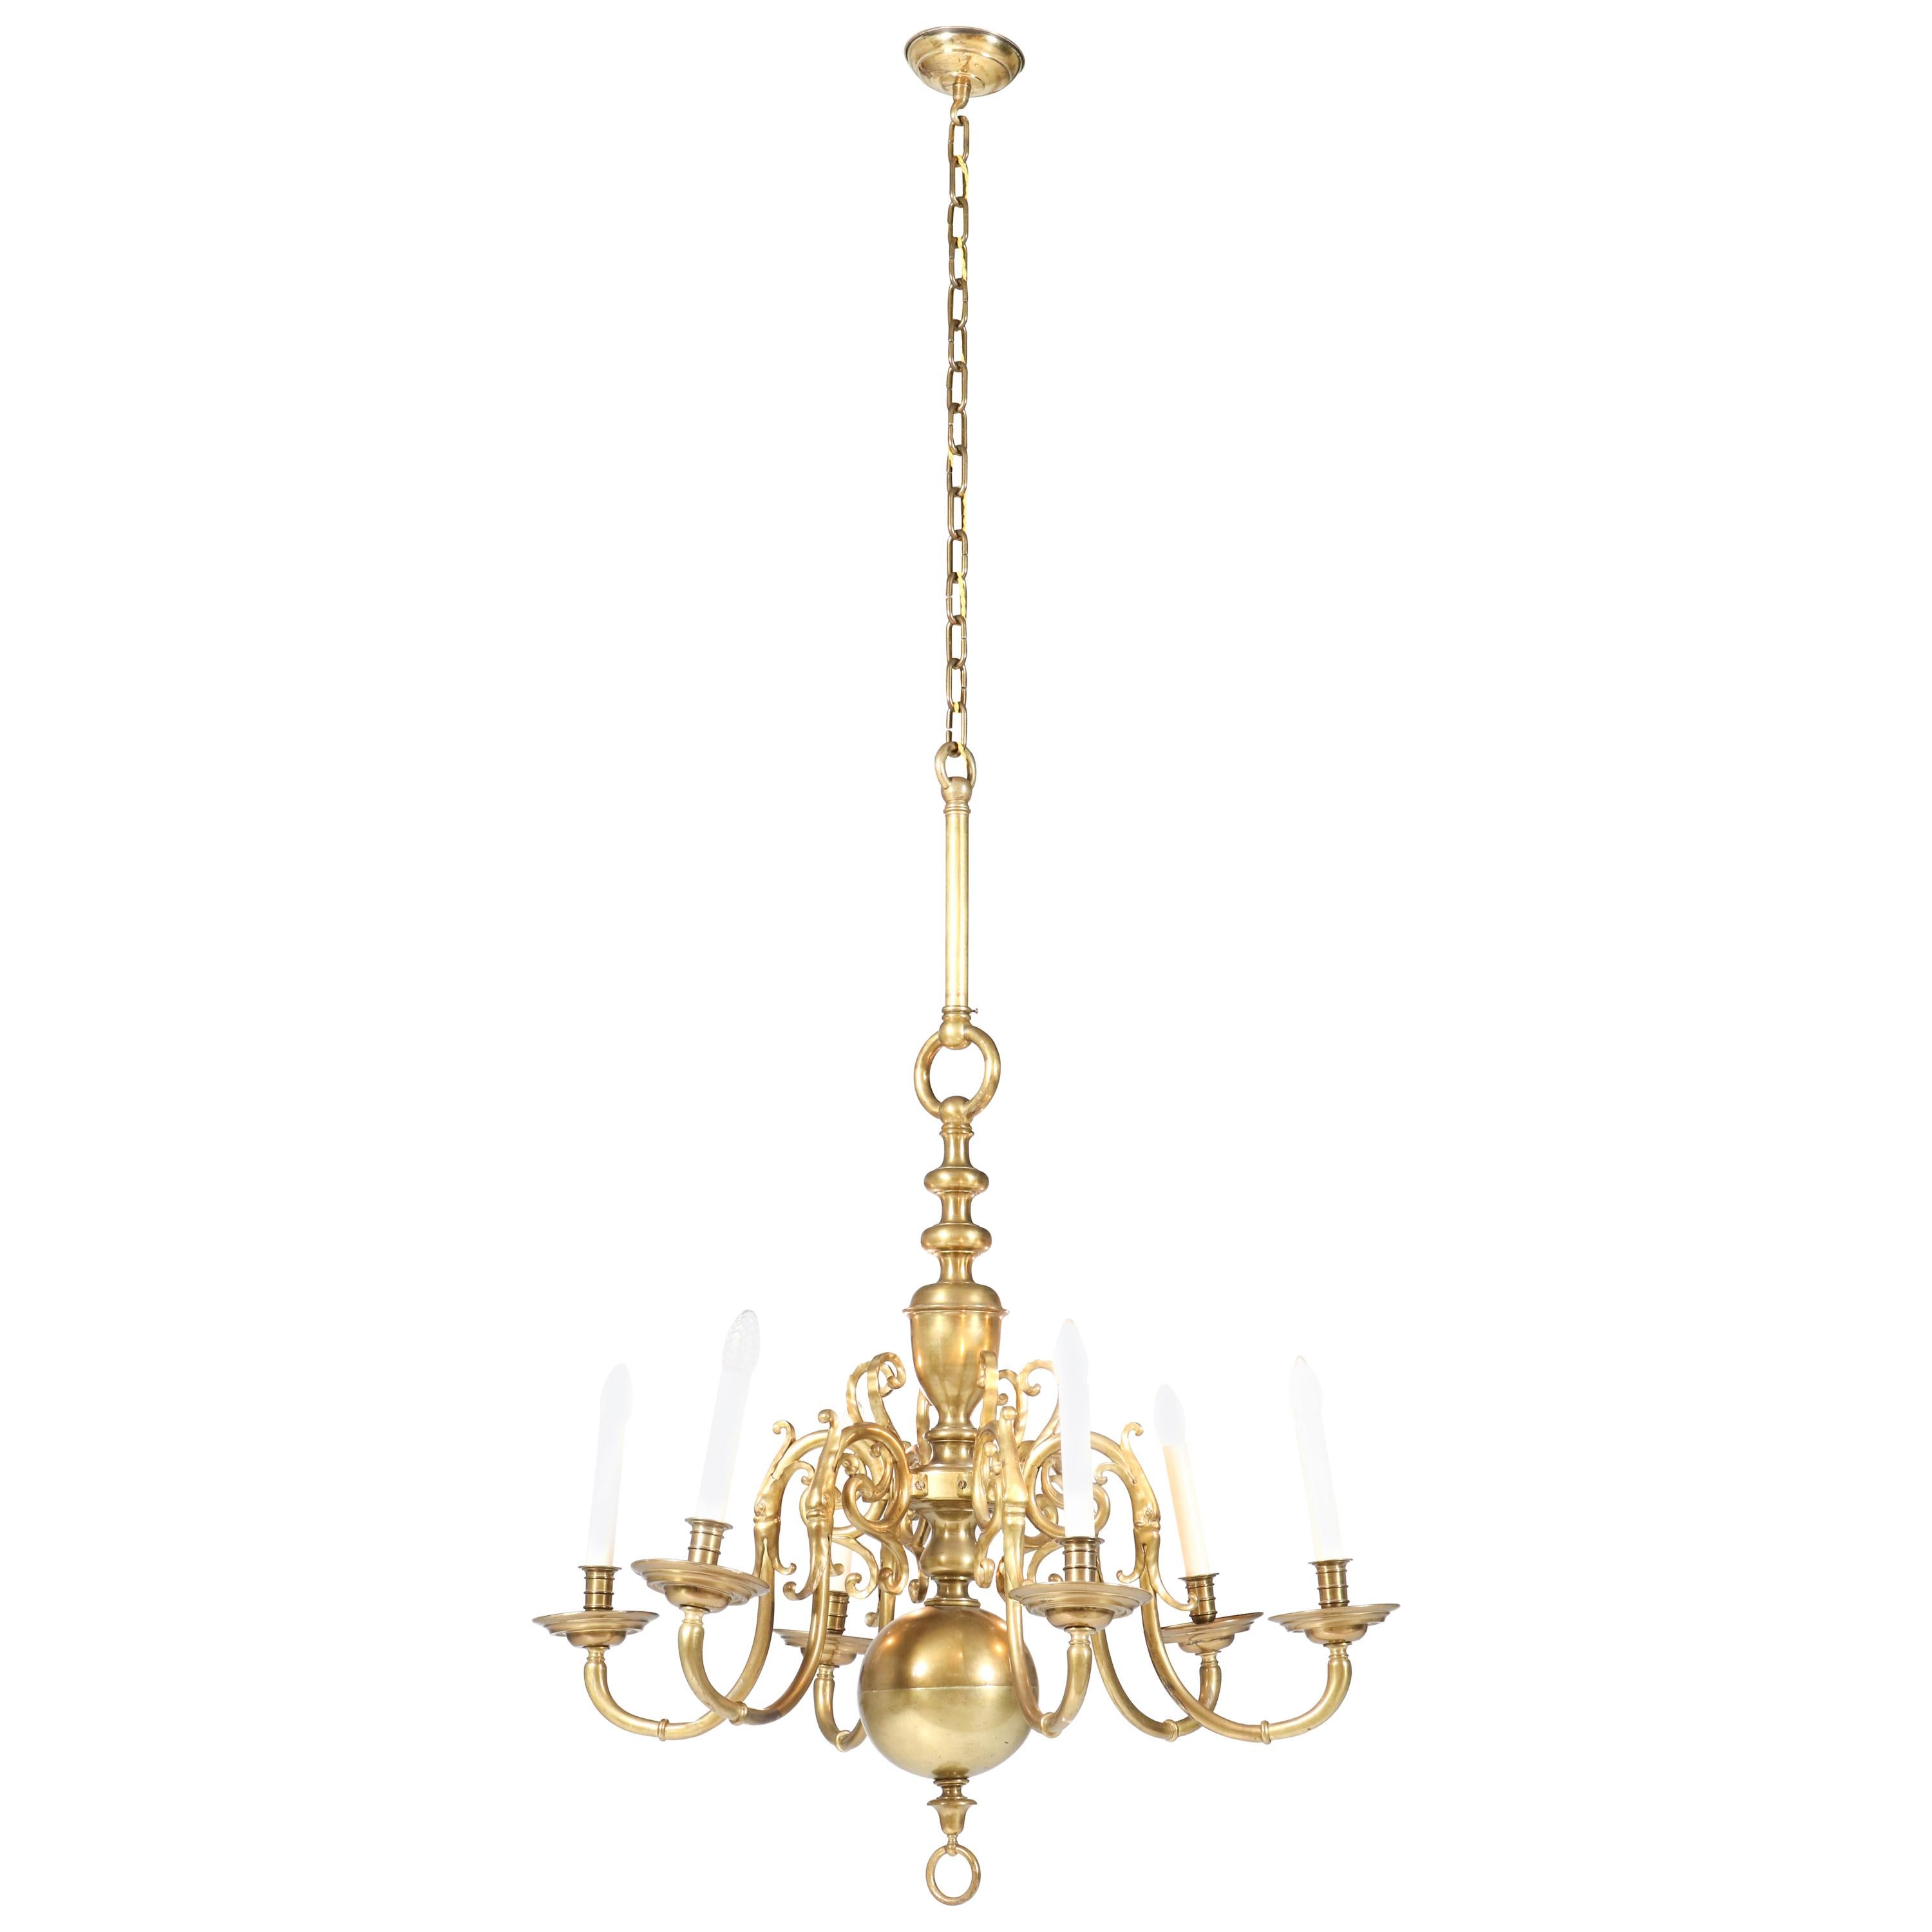 Dutch Colonial Baroque Patinated Brass Chandelier, 1880s